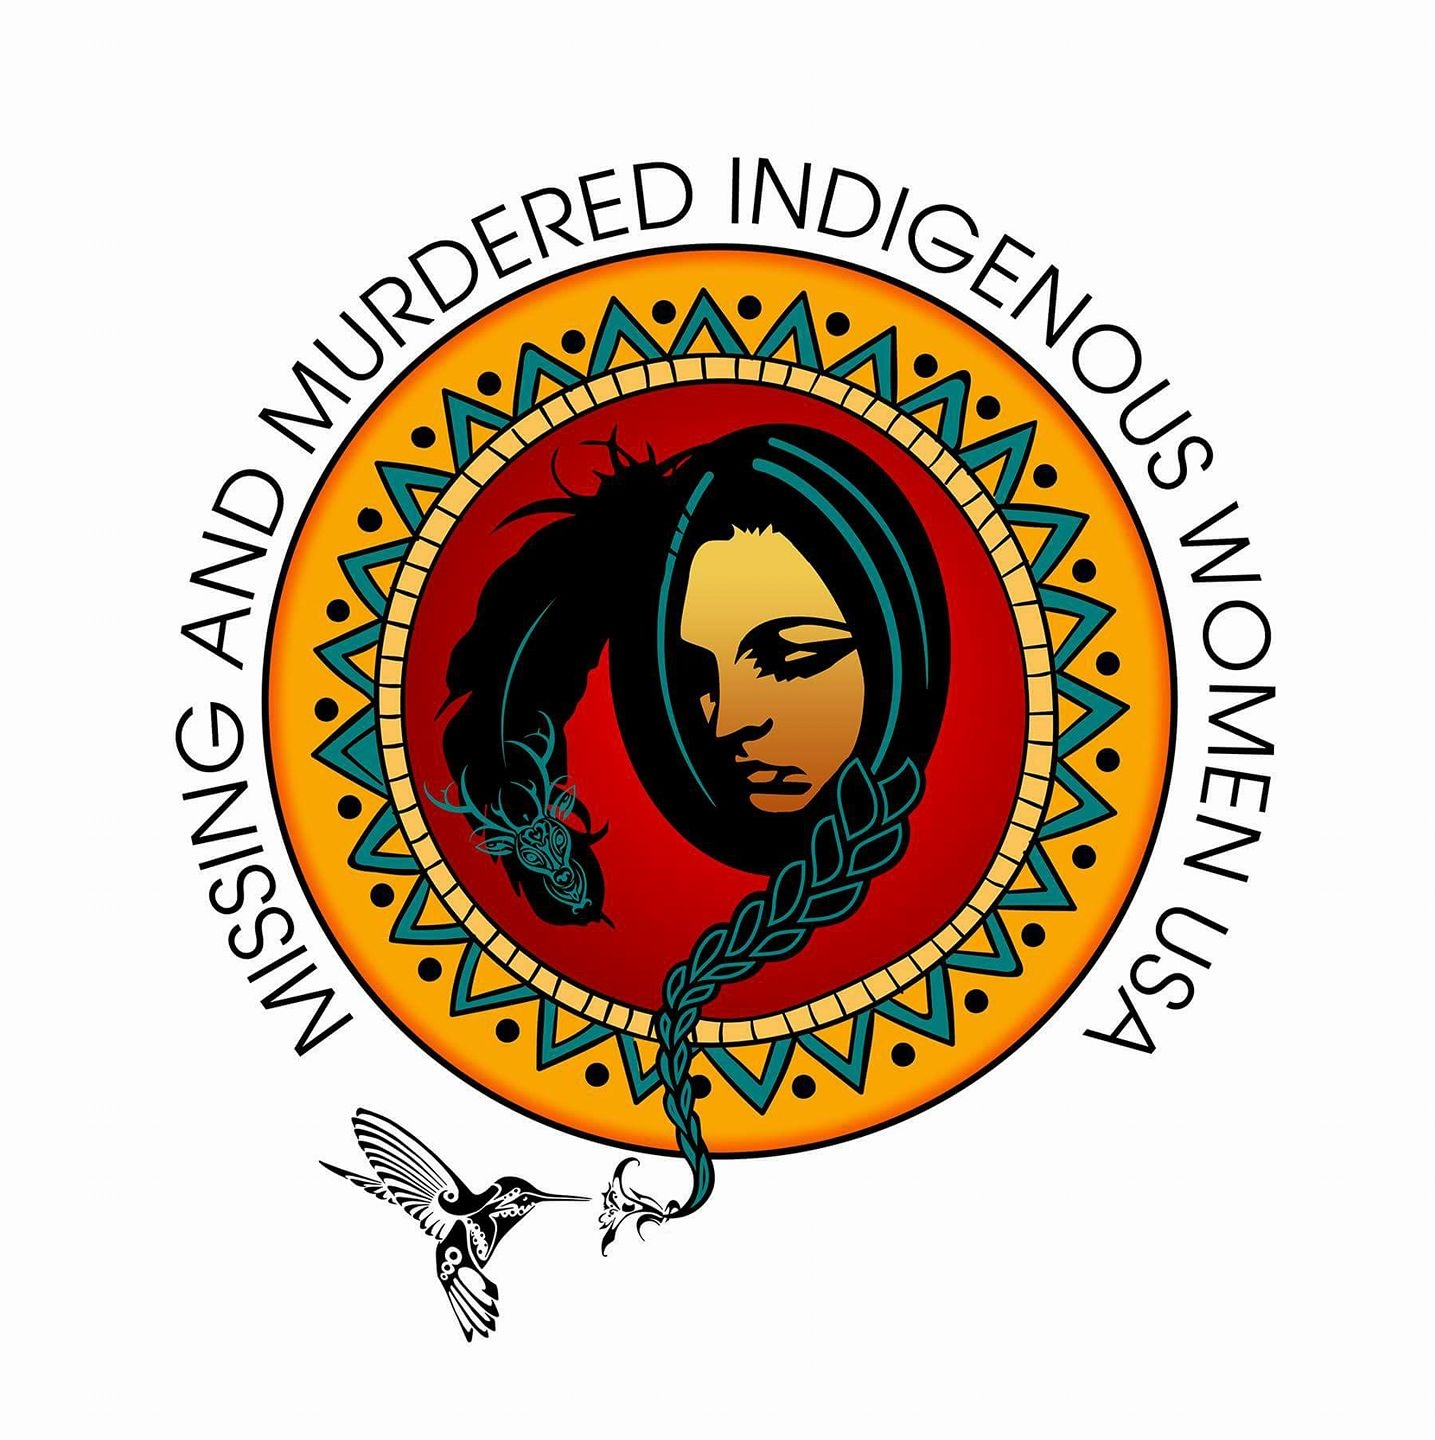 Missing and Murdered Indigenous Women USA